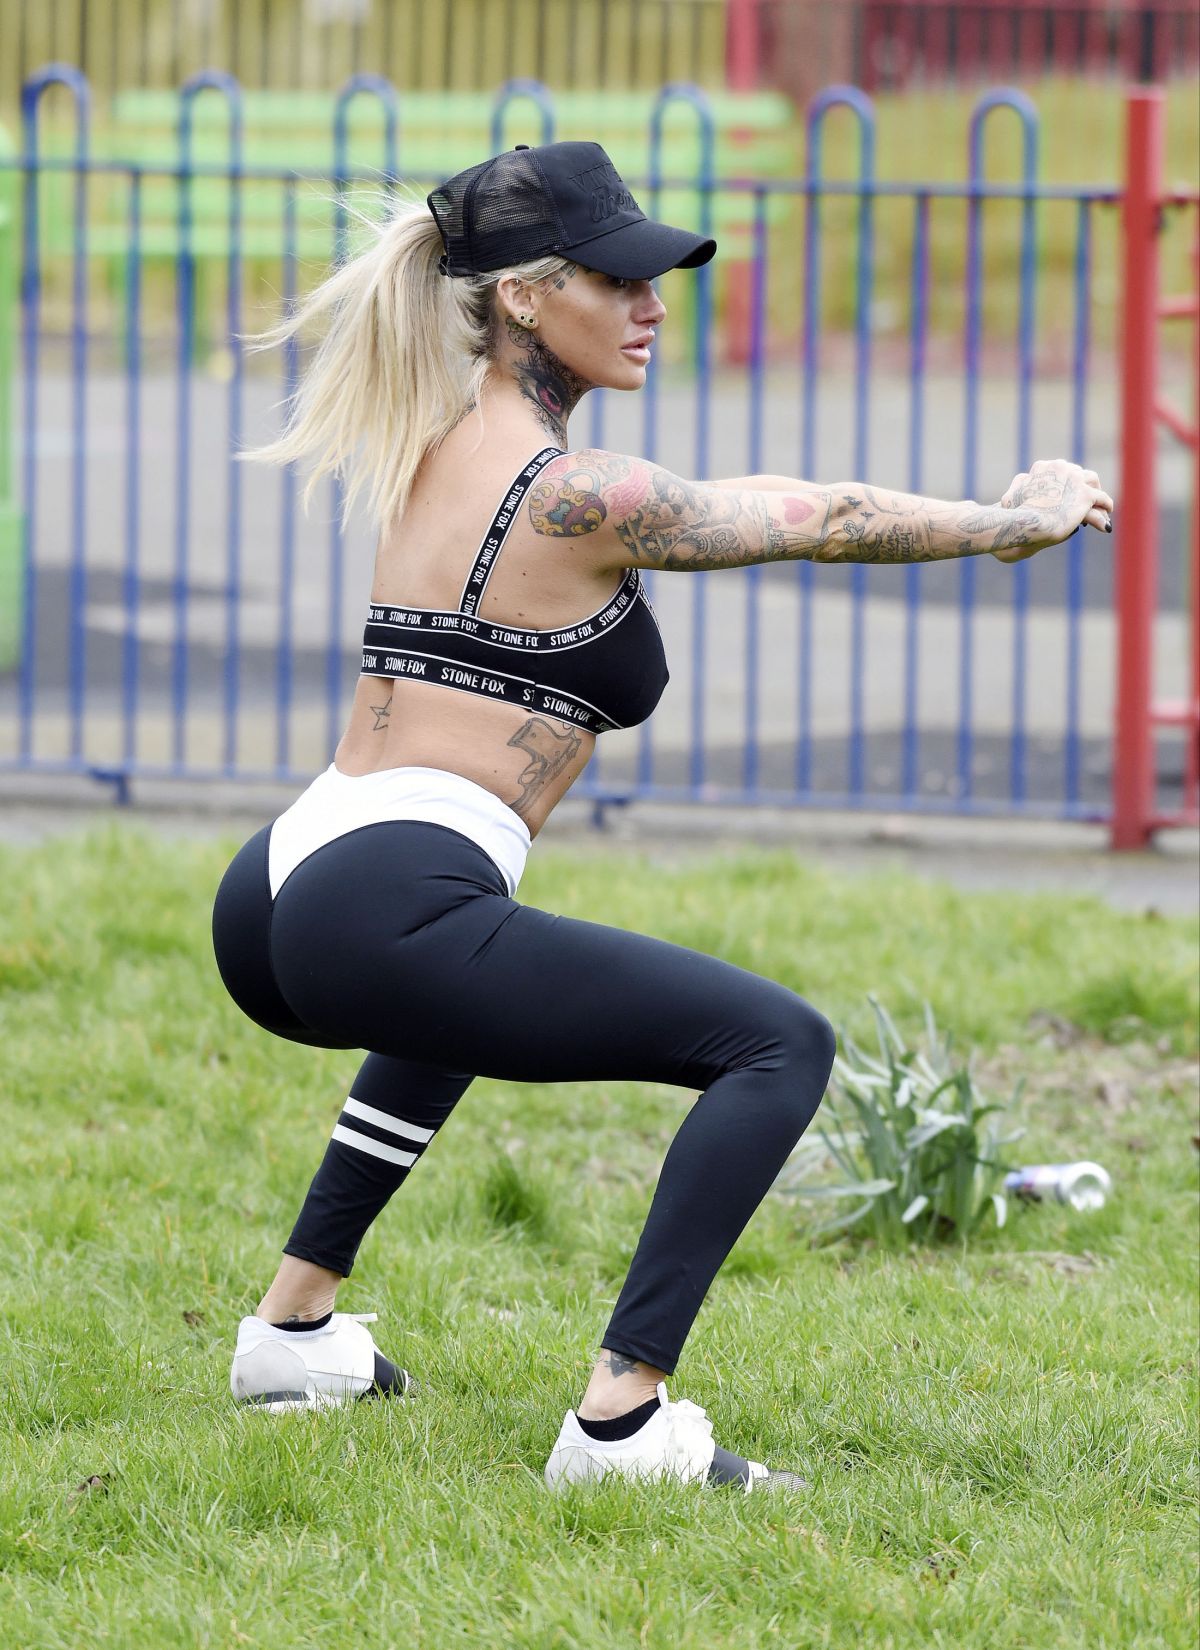 jemma-lucy-working-out-at-a-park-in-manchester-03-28-2016_6.jpg